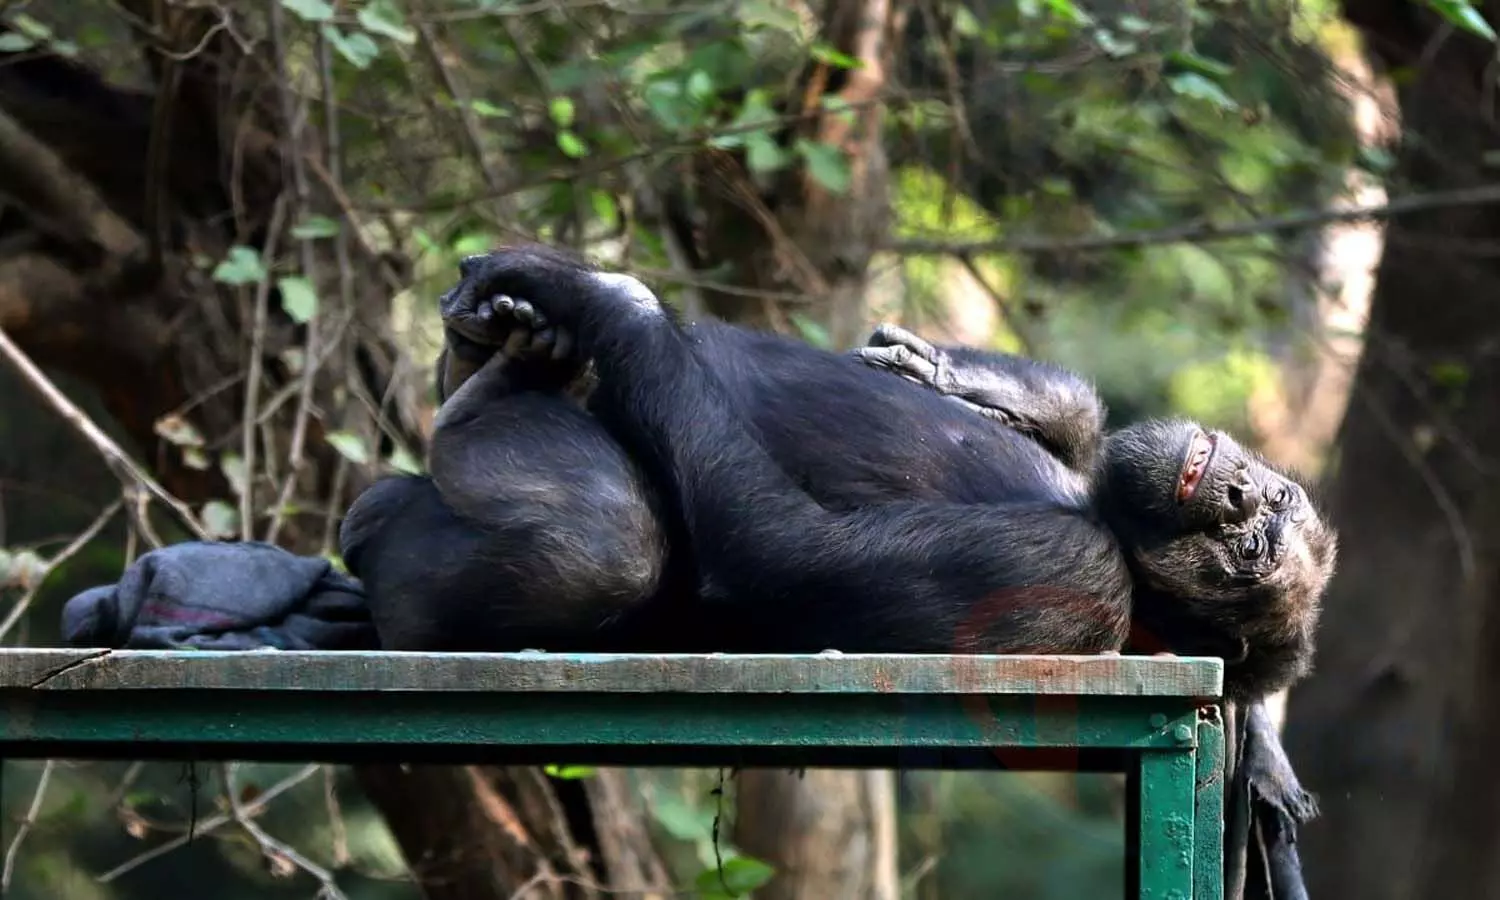 Their own ways to escape the cold: Chimpanzees resort to warm sunlight to escape the cold, room heater for snakes